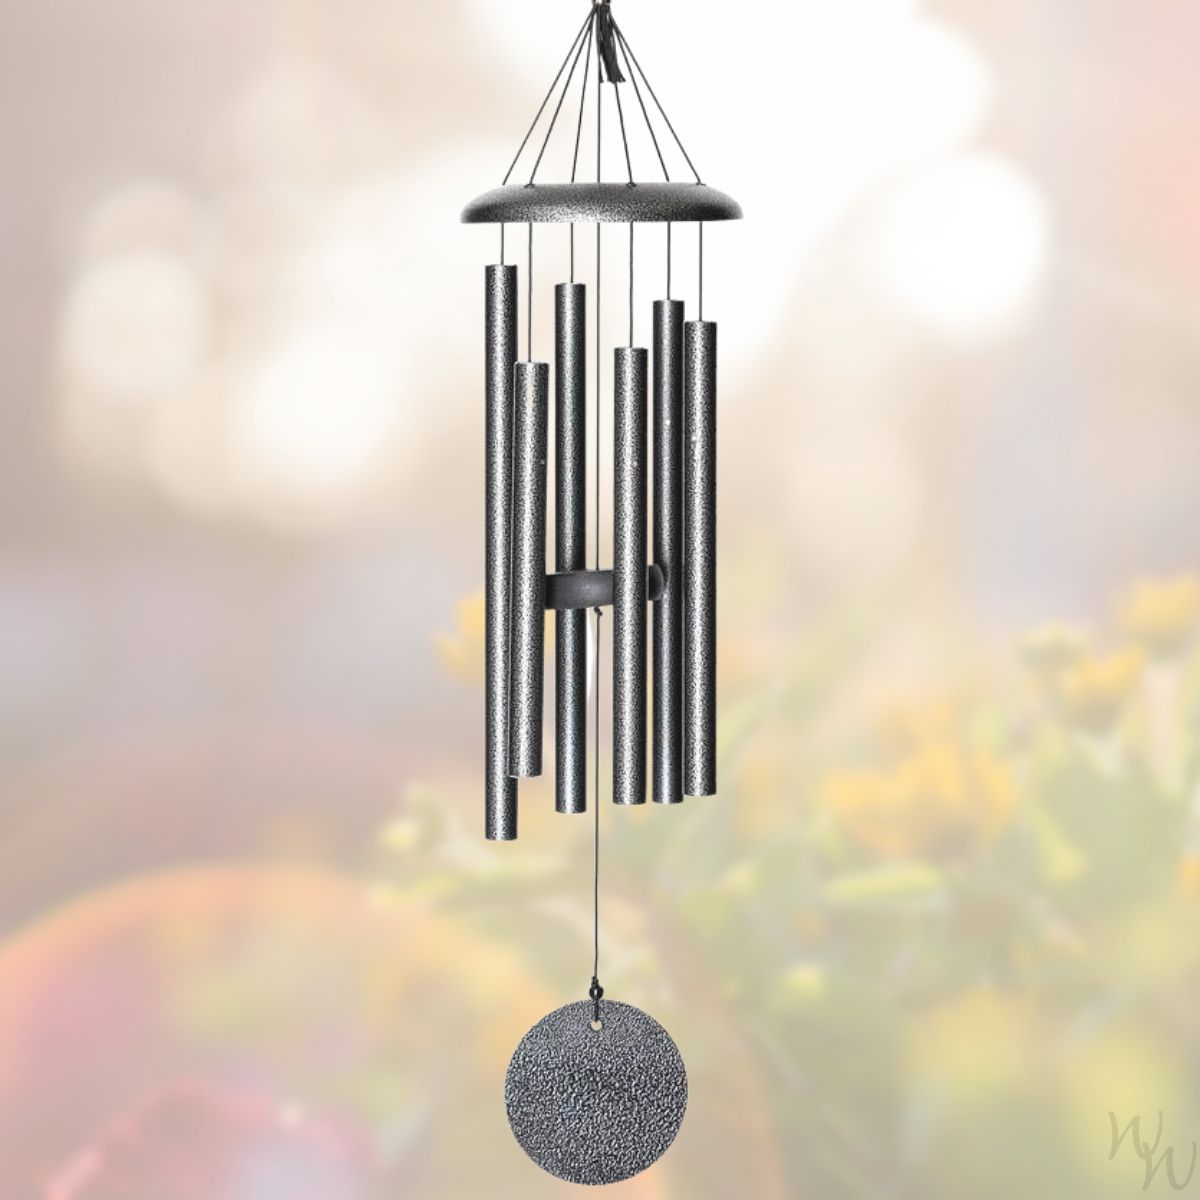 Corinthian Bells 27 Inch Silver Vein Wind Chime - Scale Of C